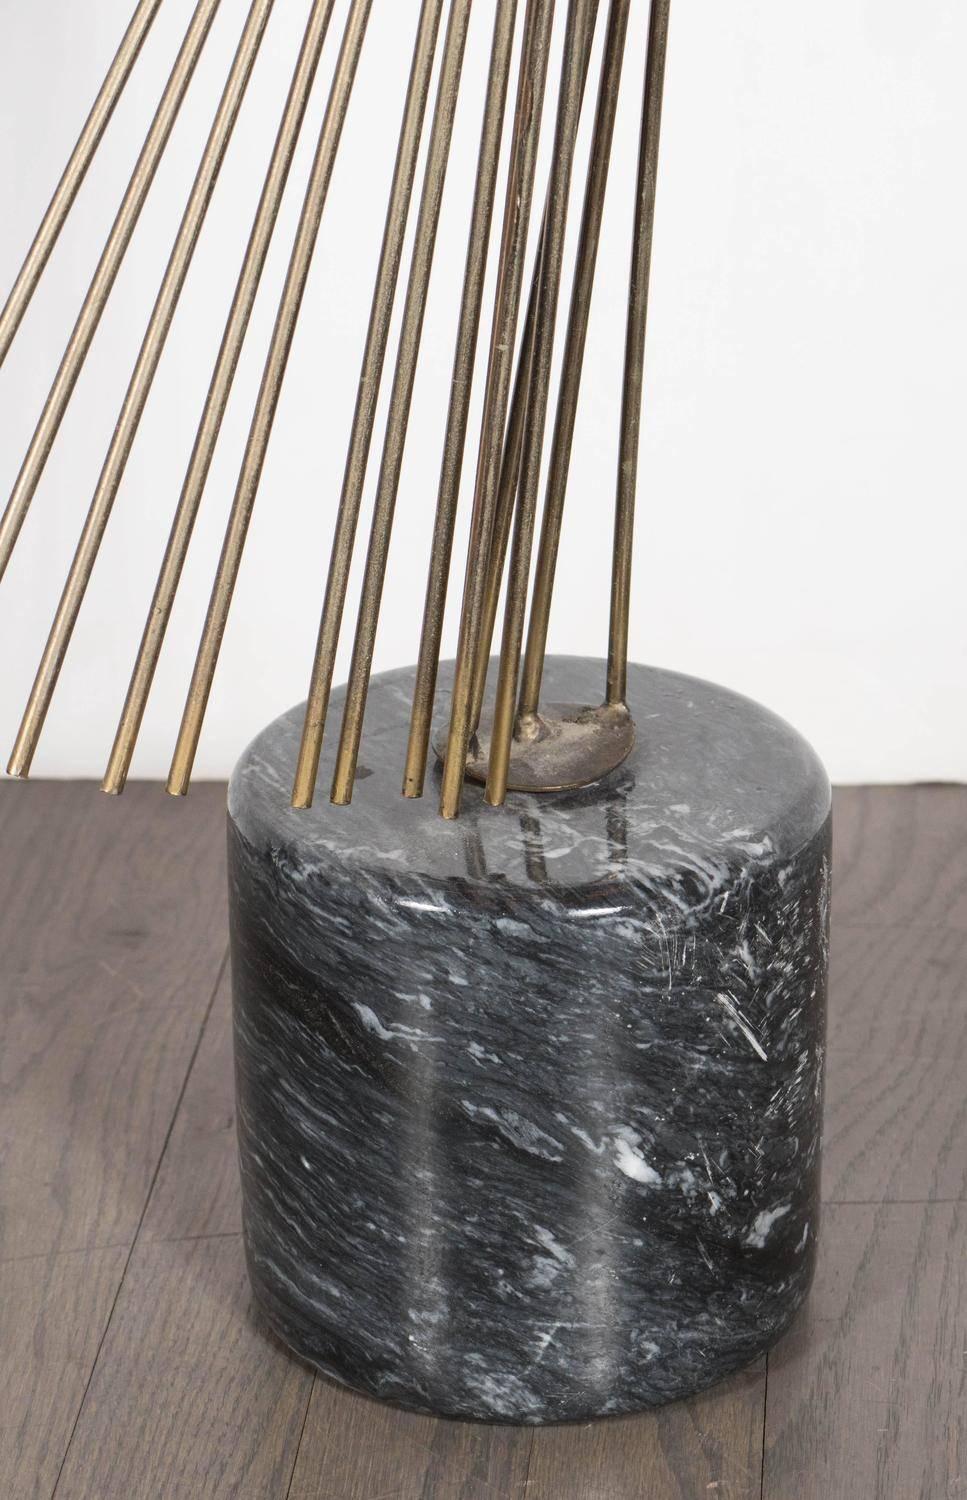 A Brutalist sculpture in patinated brass on a polished black marble plinth by Curtis Jere. It offers a curved fan-like projection of brass rods that meet at a central point. The sculpture attaches to a plinth realized in exotic black belgian marble.